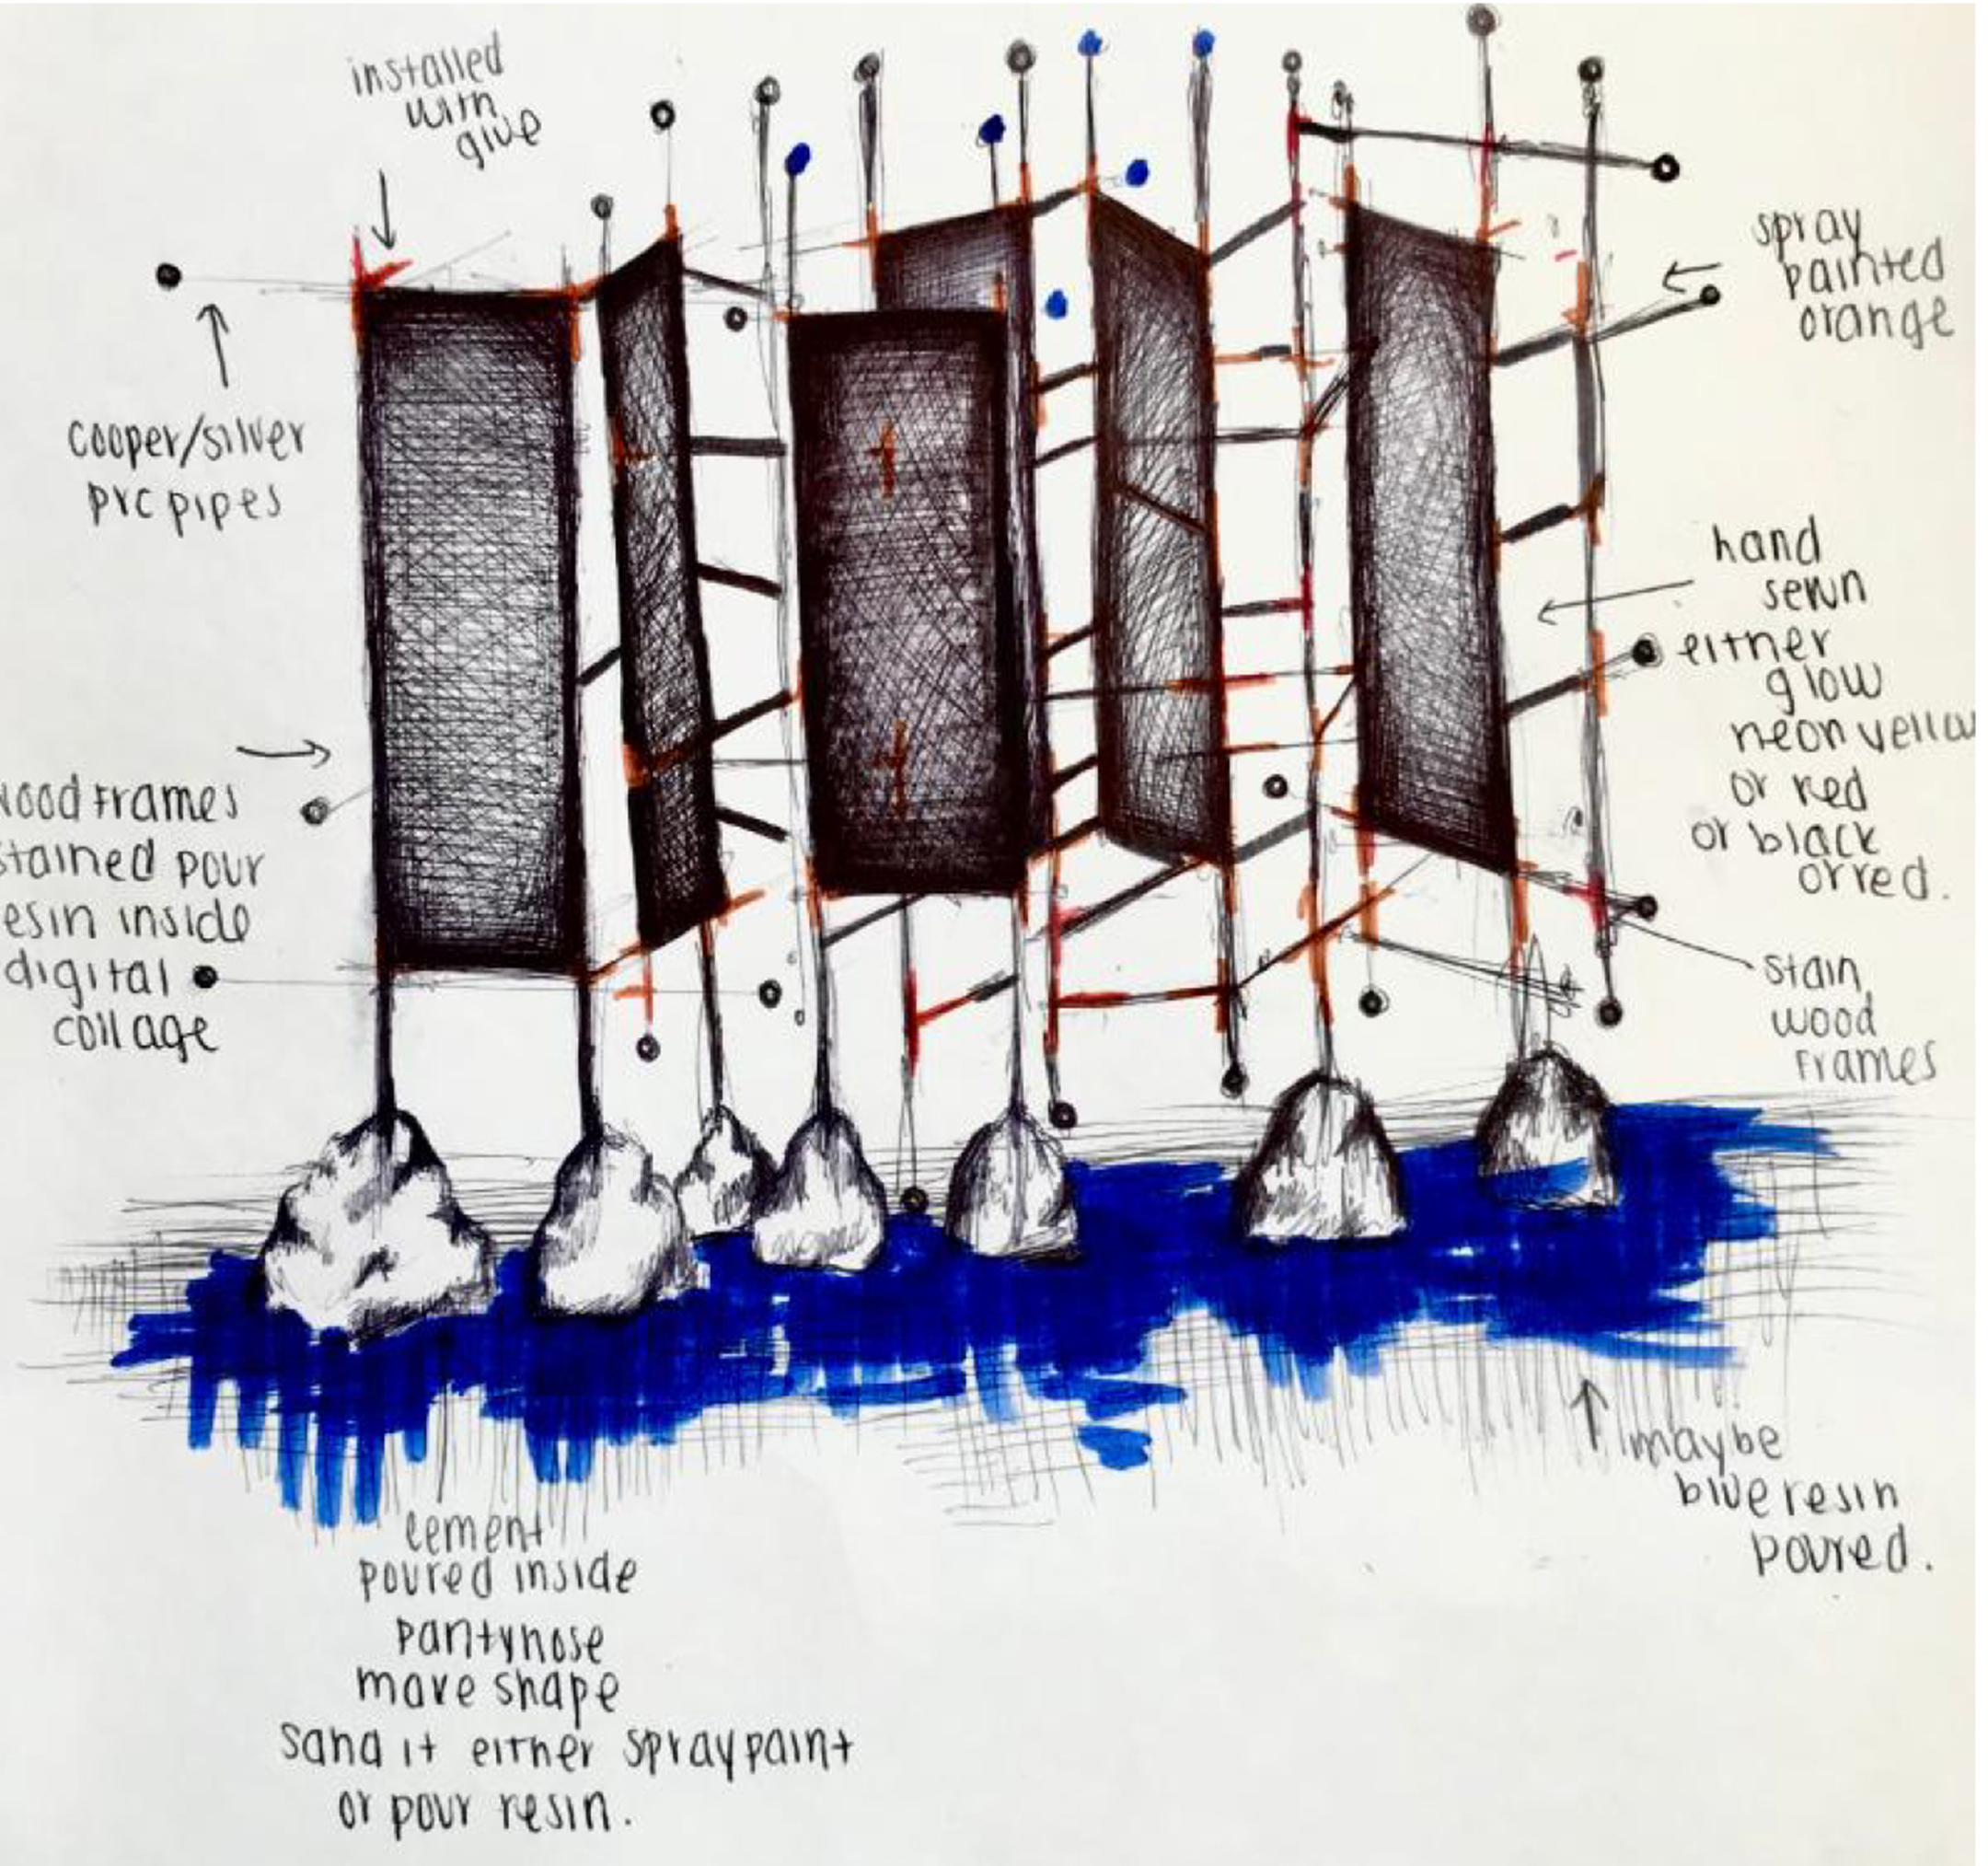 Sketch of a work in progress, depicting six gray rectangles hung on wire and erected on white whipped cream-like stands